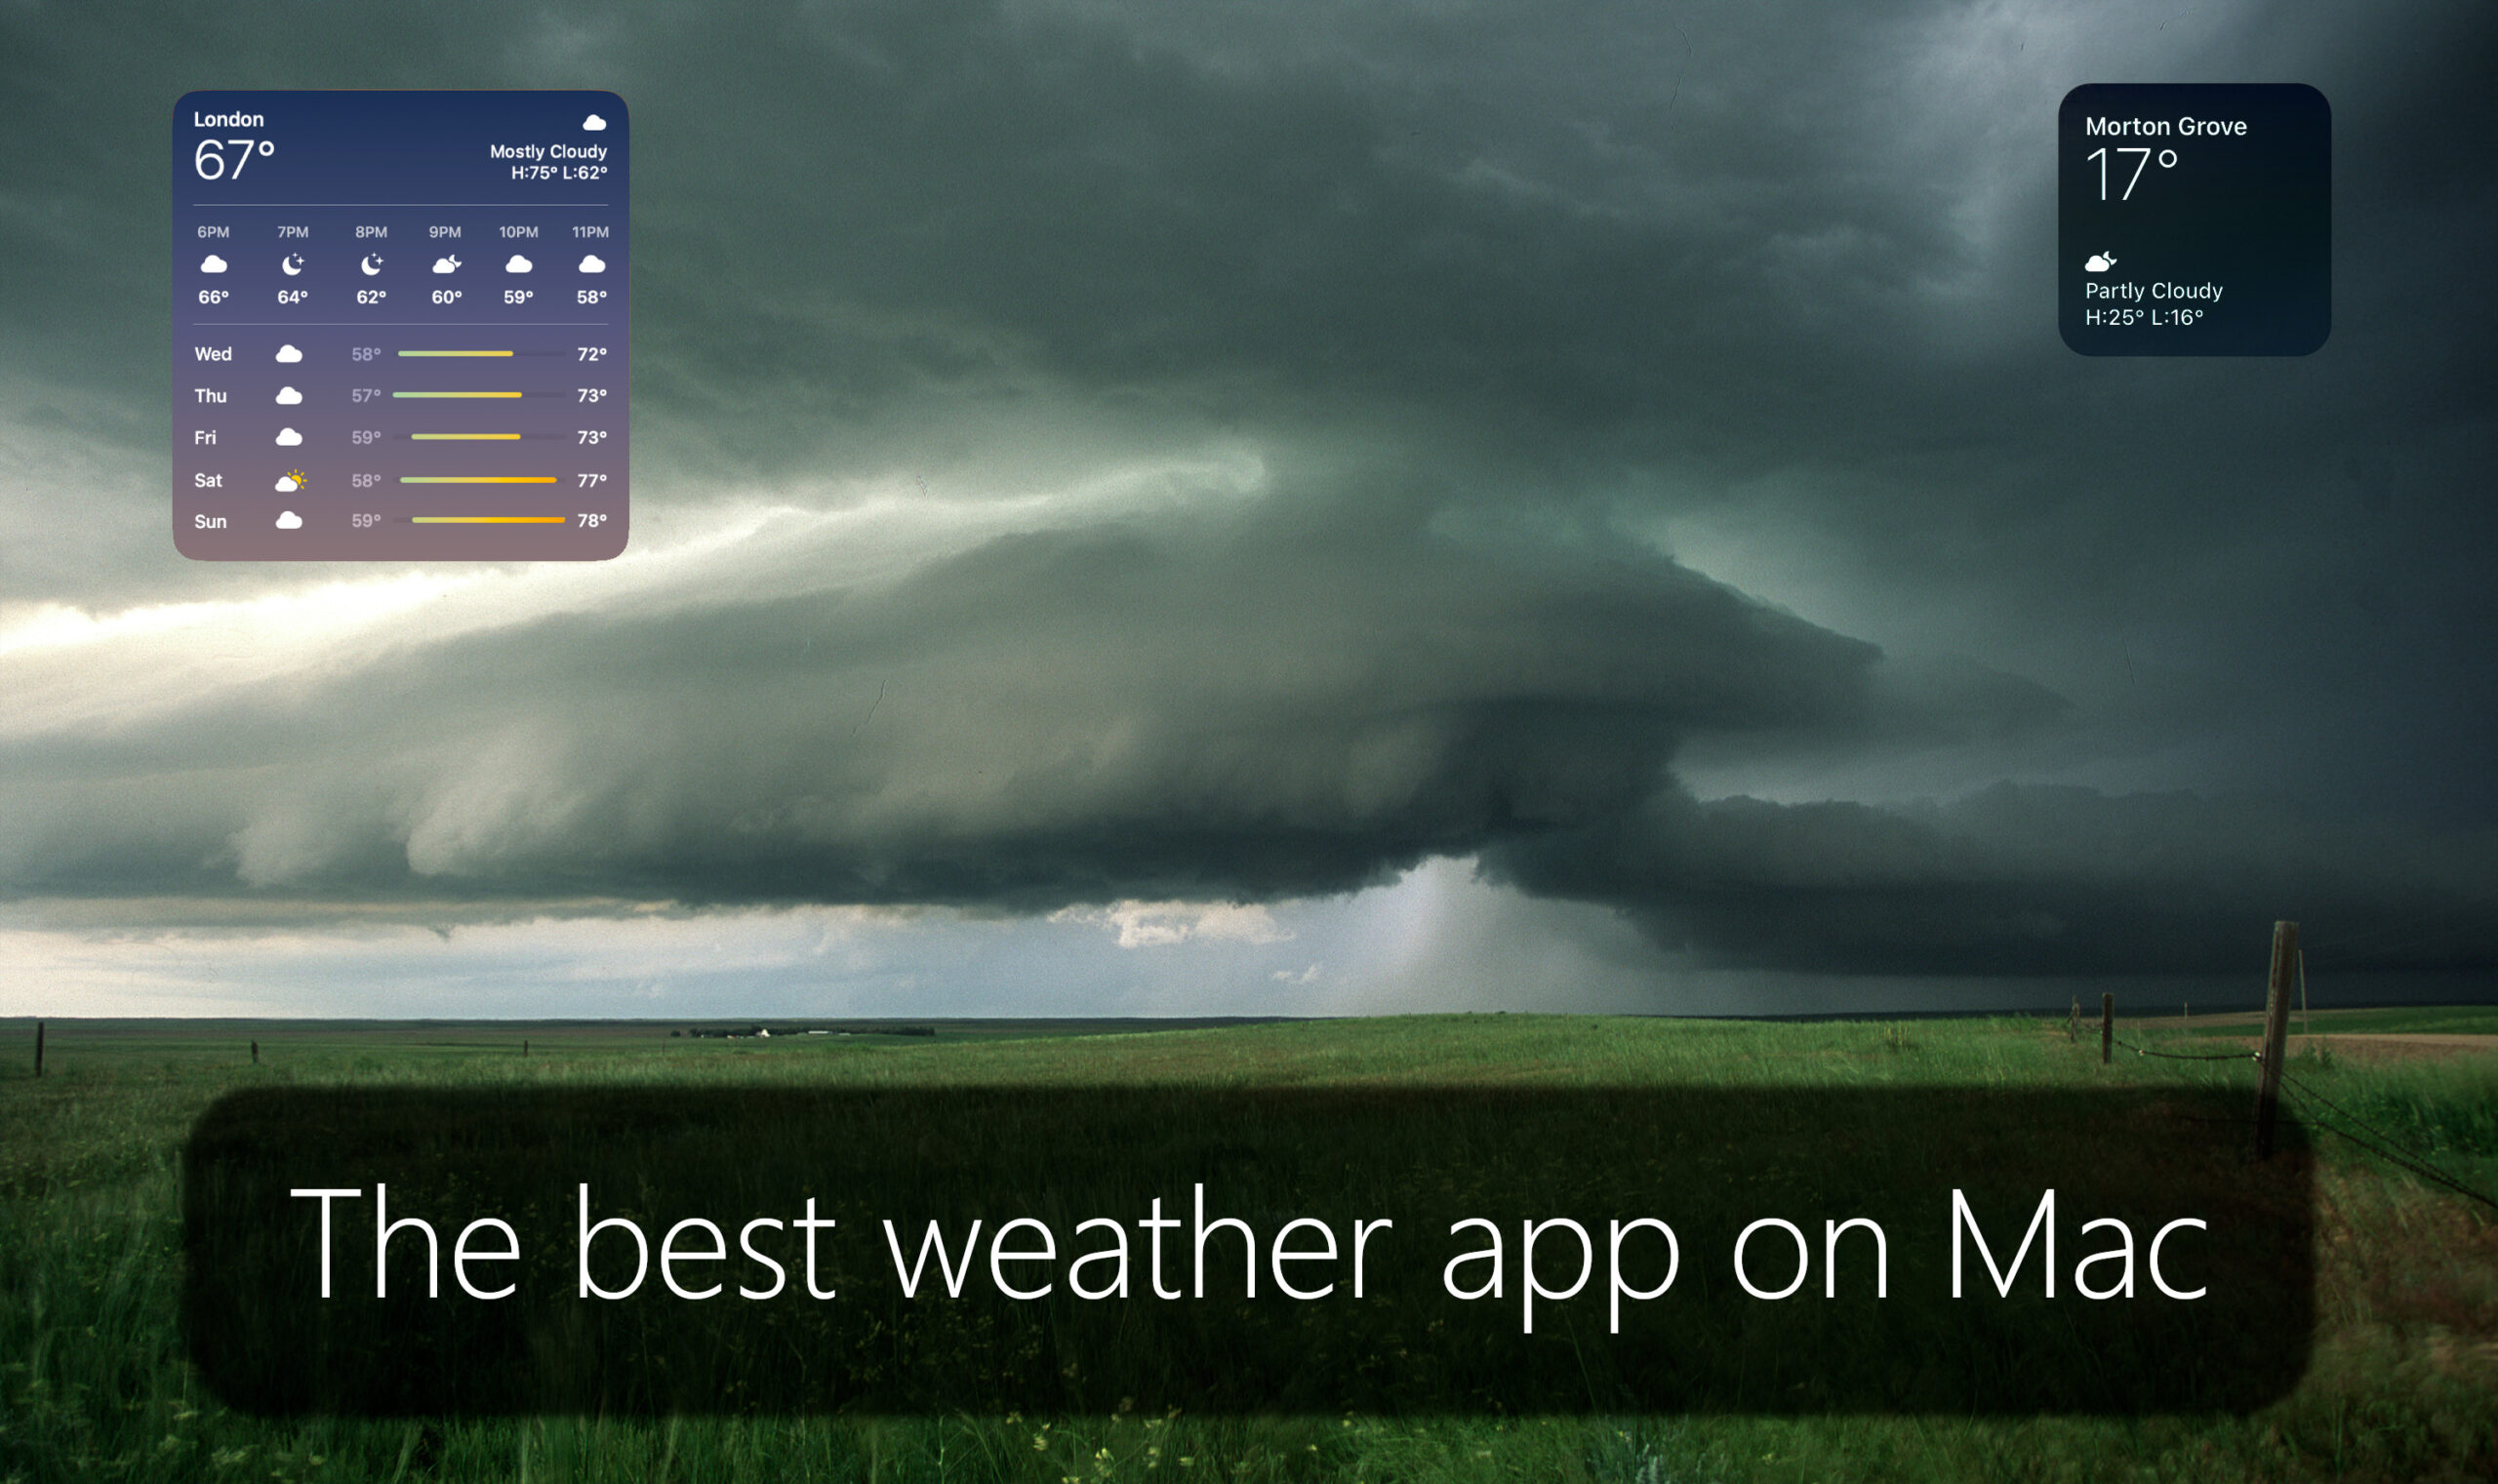 What is the best weather app on Mac?